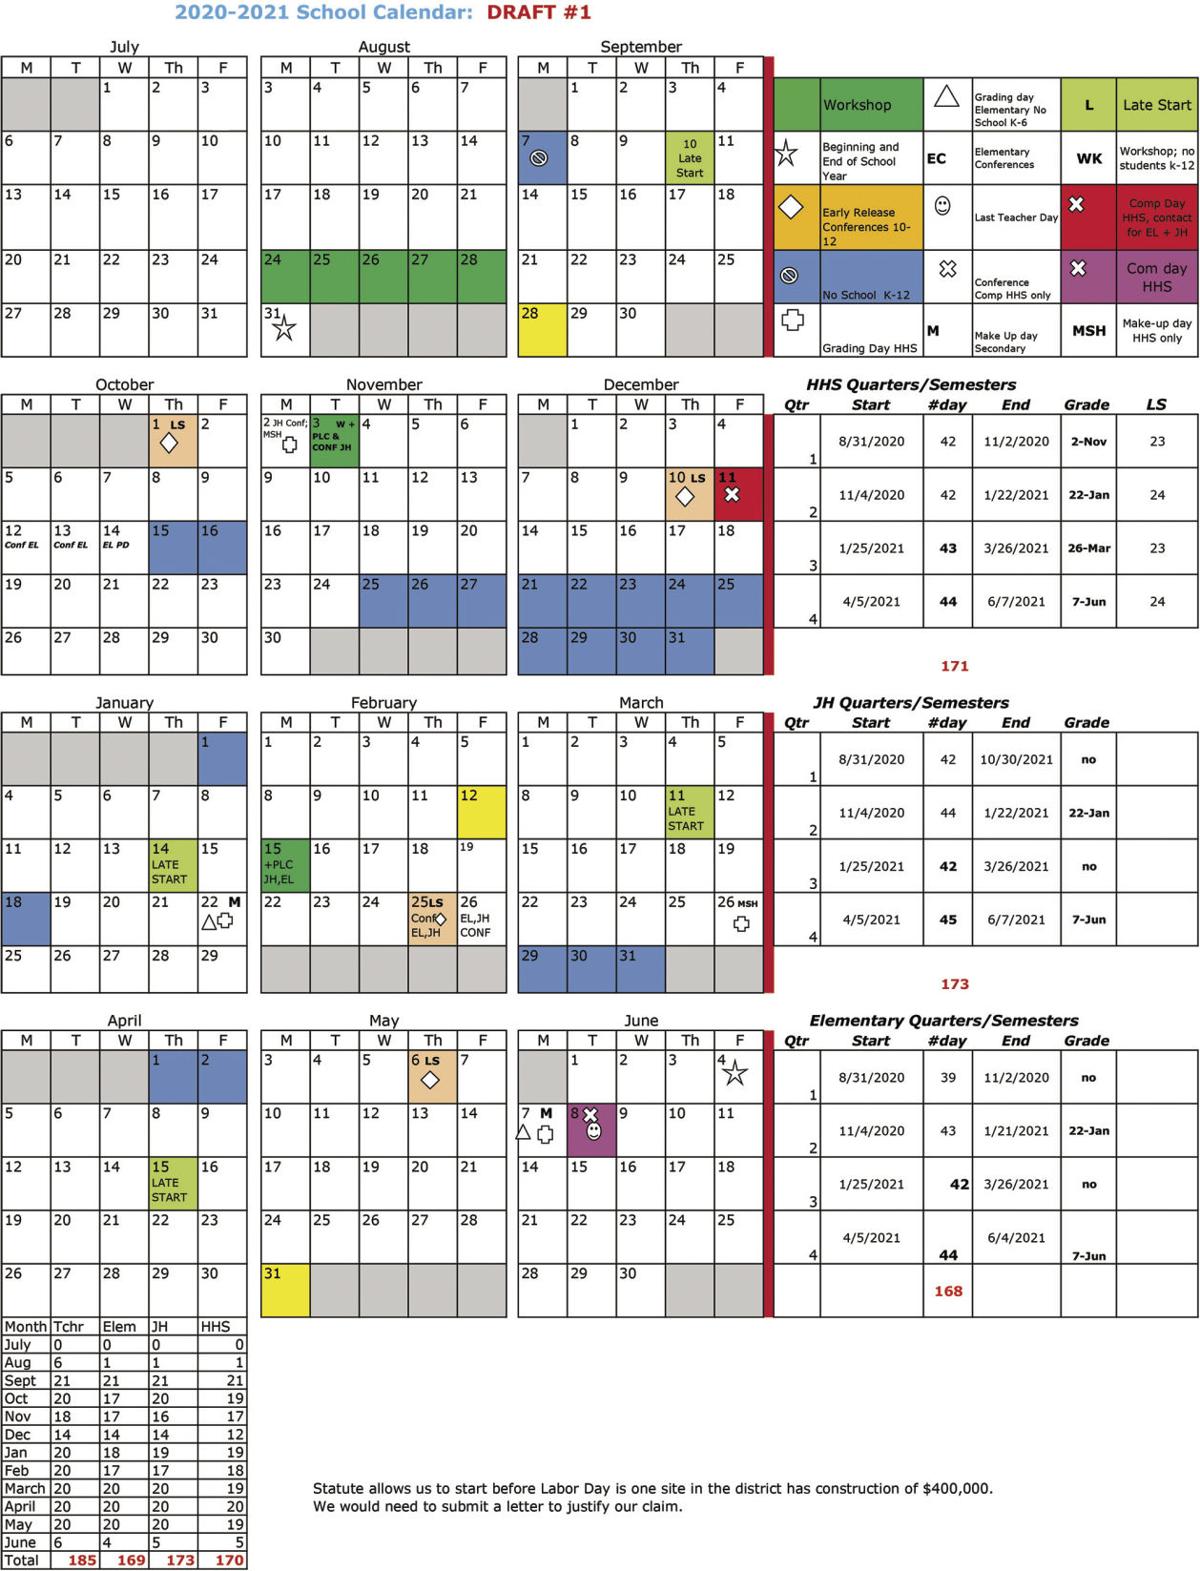 West Point Calendar - Customize and Print